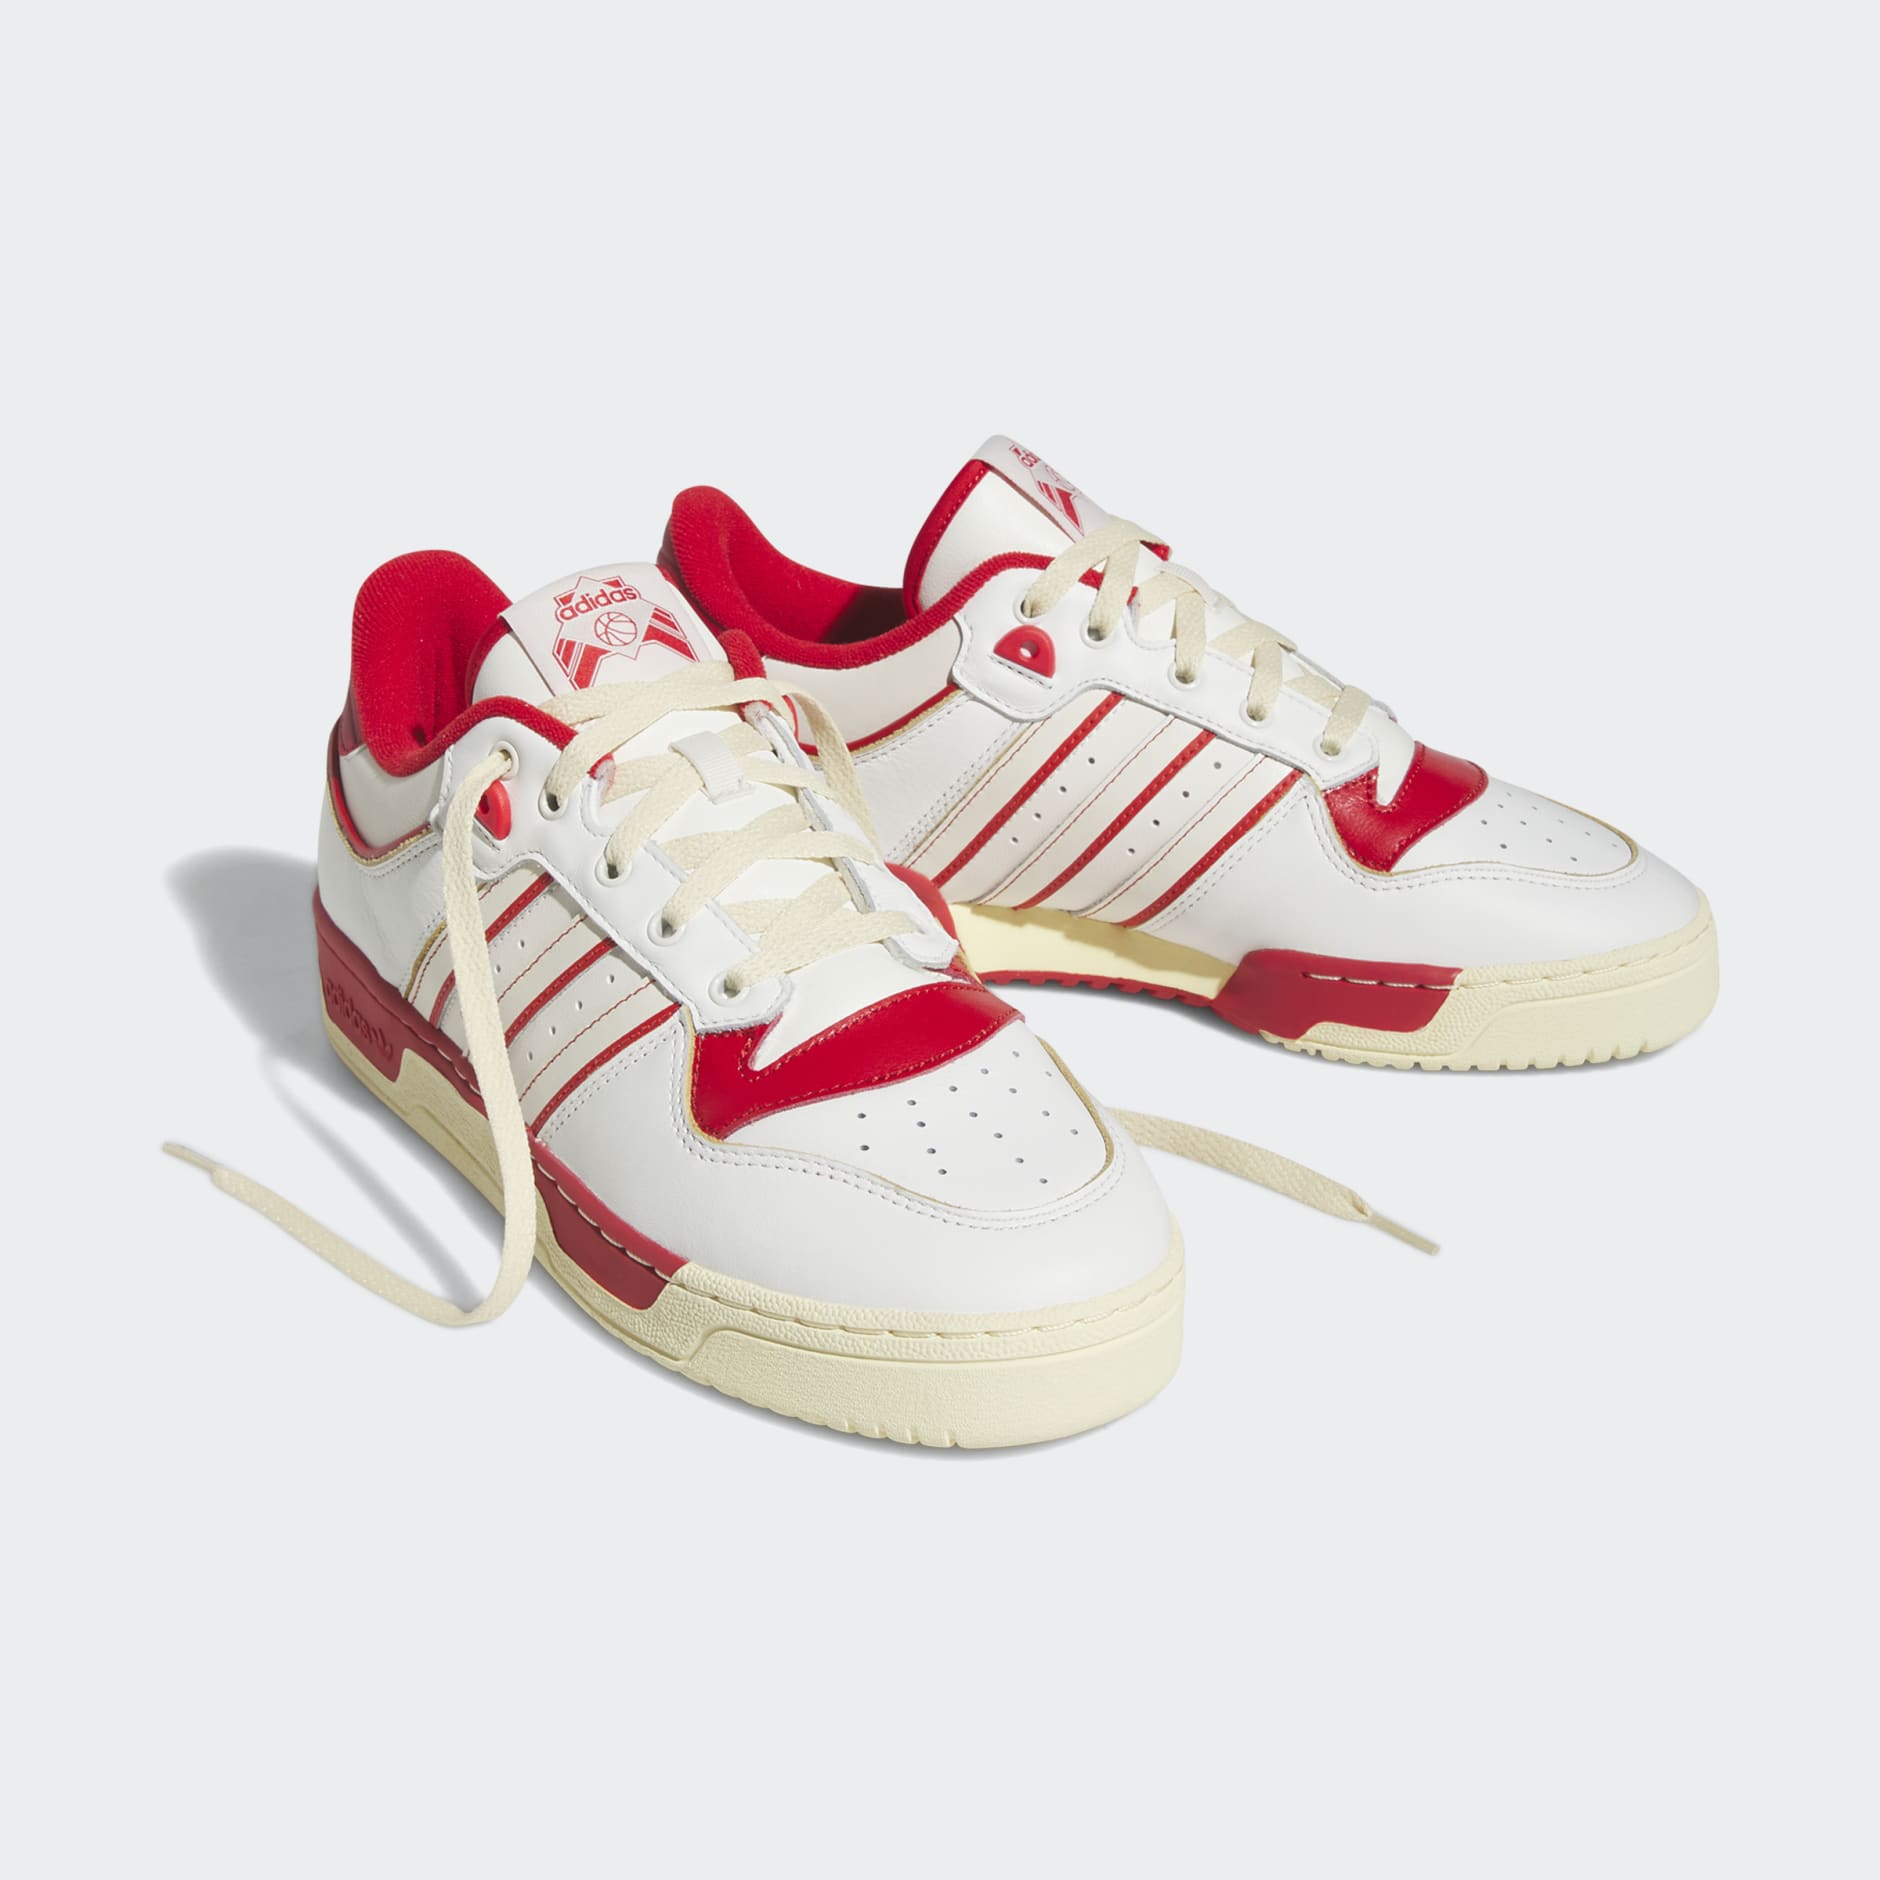 Men's Shoes - Rivalry Low 86 Shoes - White | adidas Egypt